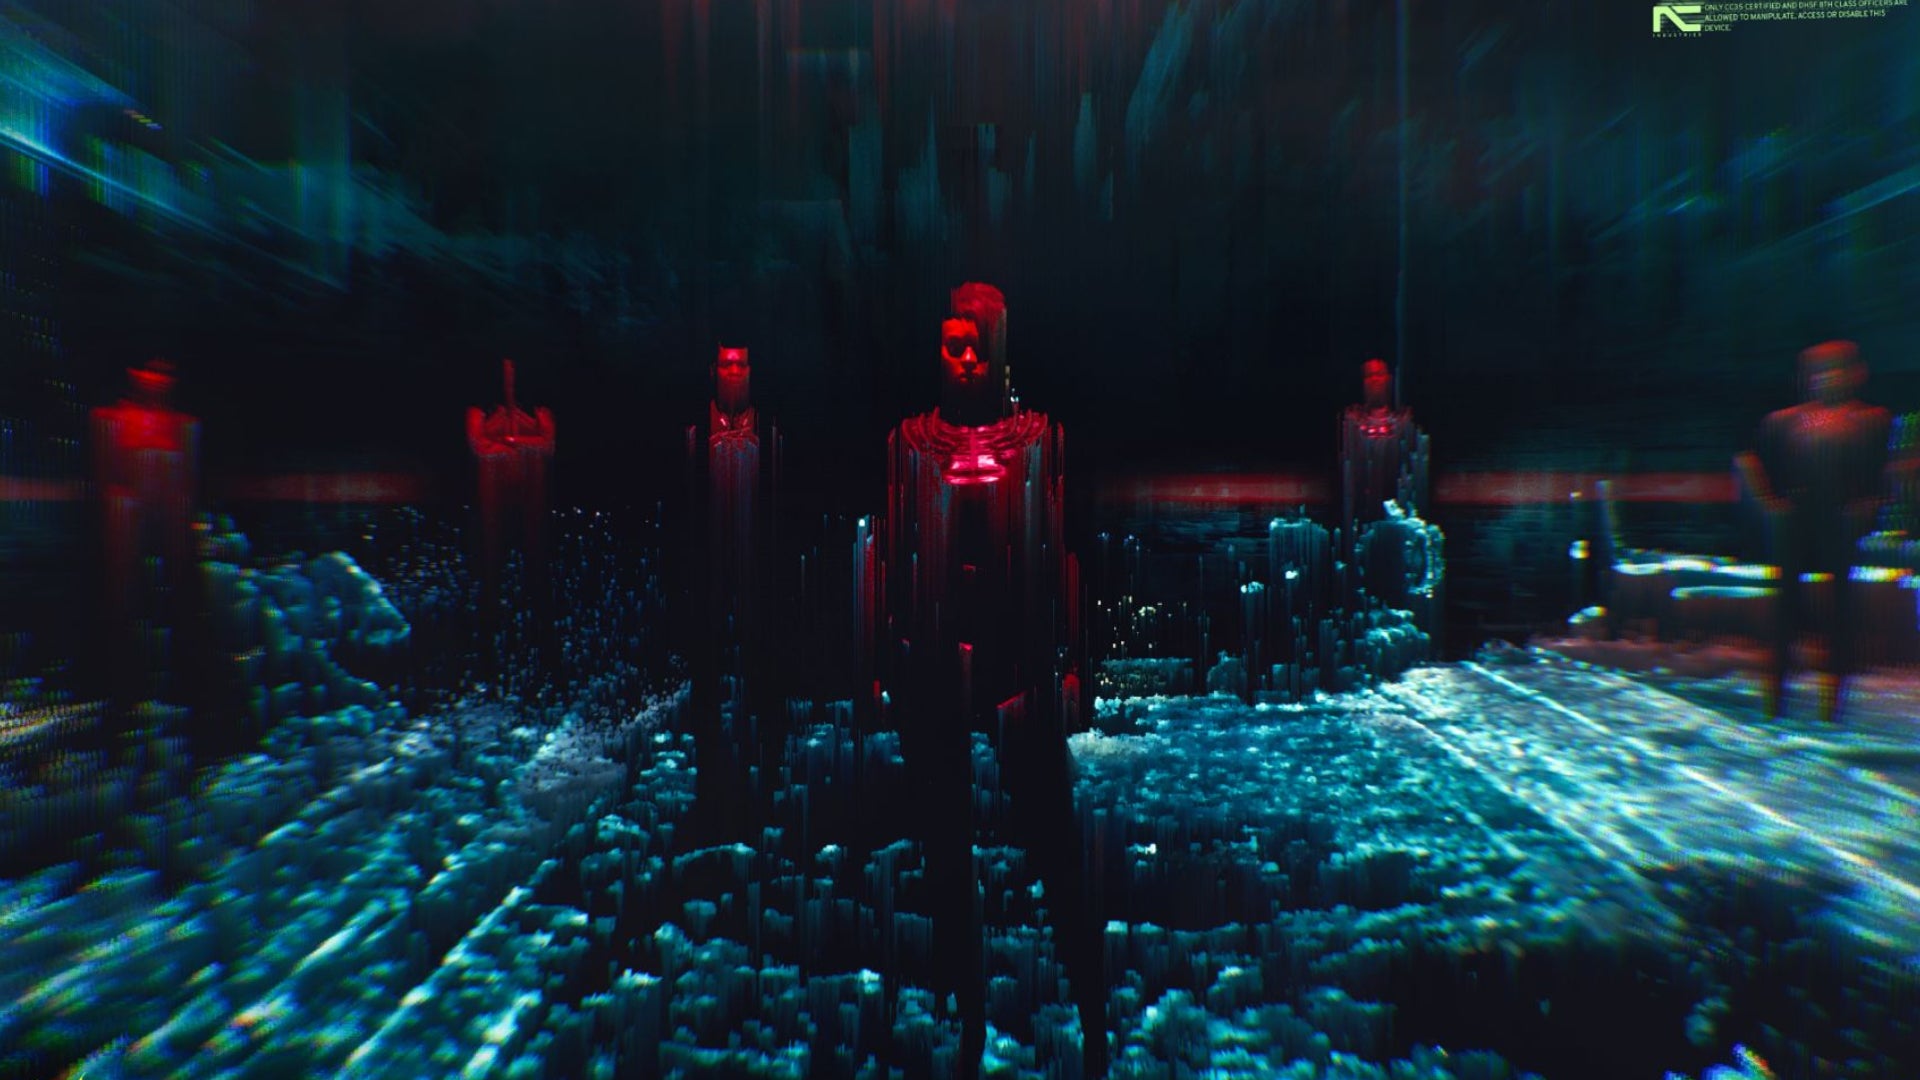 A screenshot from a dreamlike cybernetic landscape in Cyberpunk 2077. Indistinct red figures are standing in the foreground facing the camera.